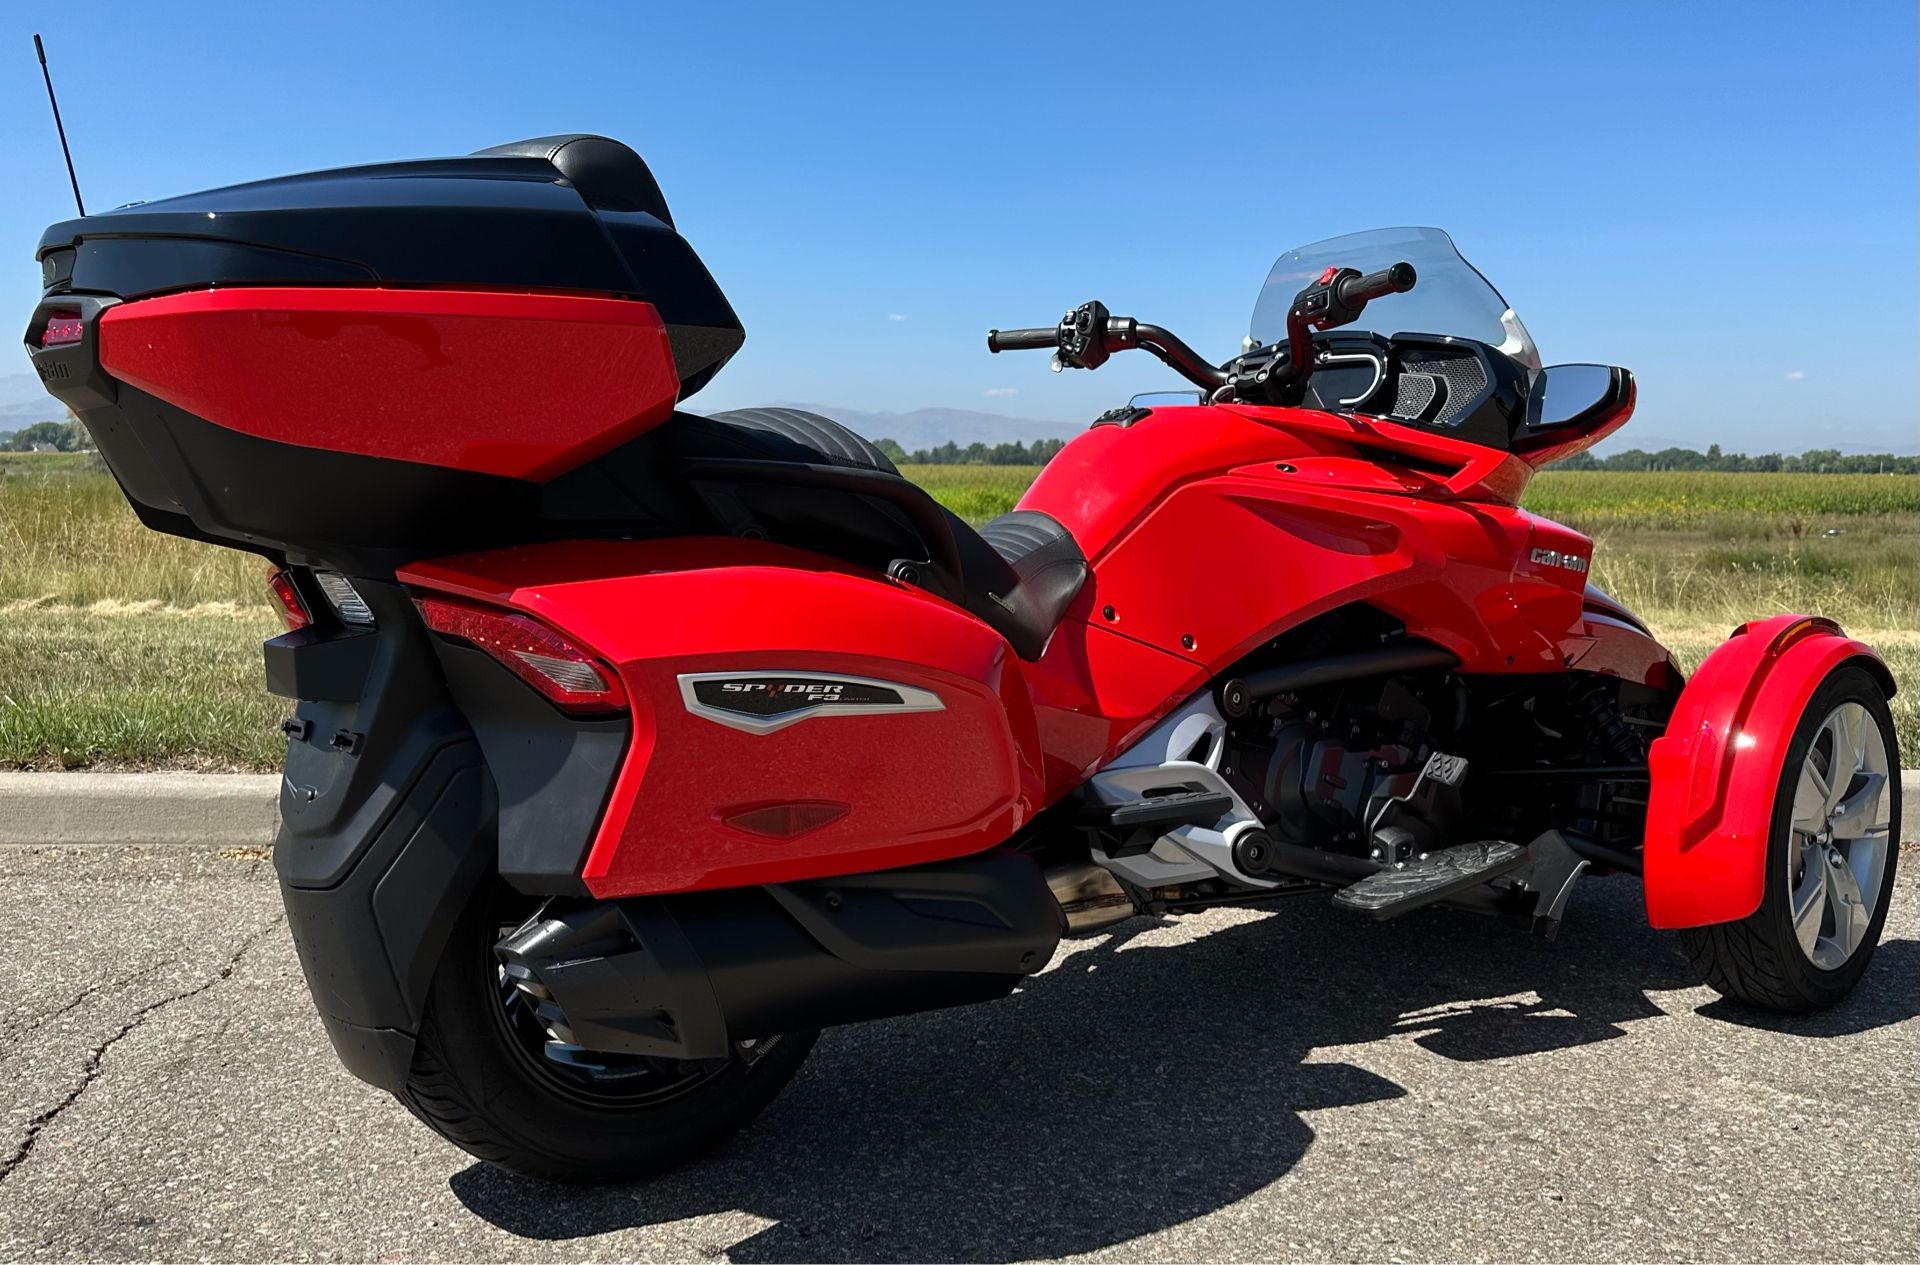 2023 Can-Am Spyder F3 Limited in Fort Collins, Colorado - Photo 6